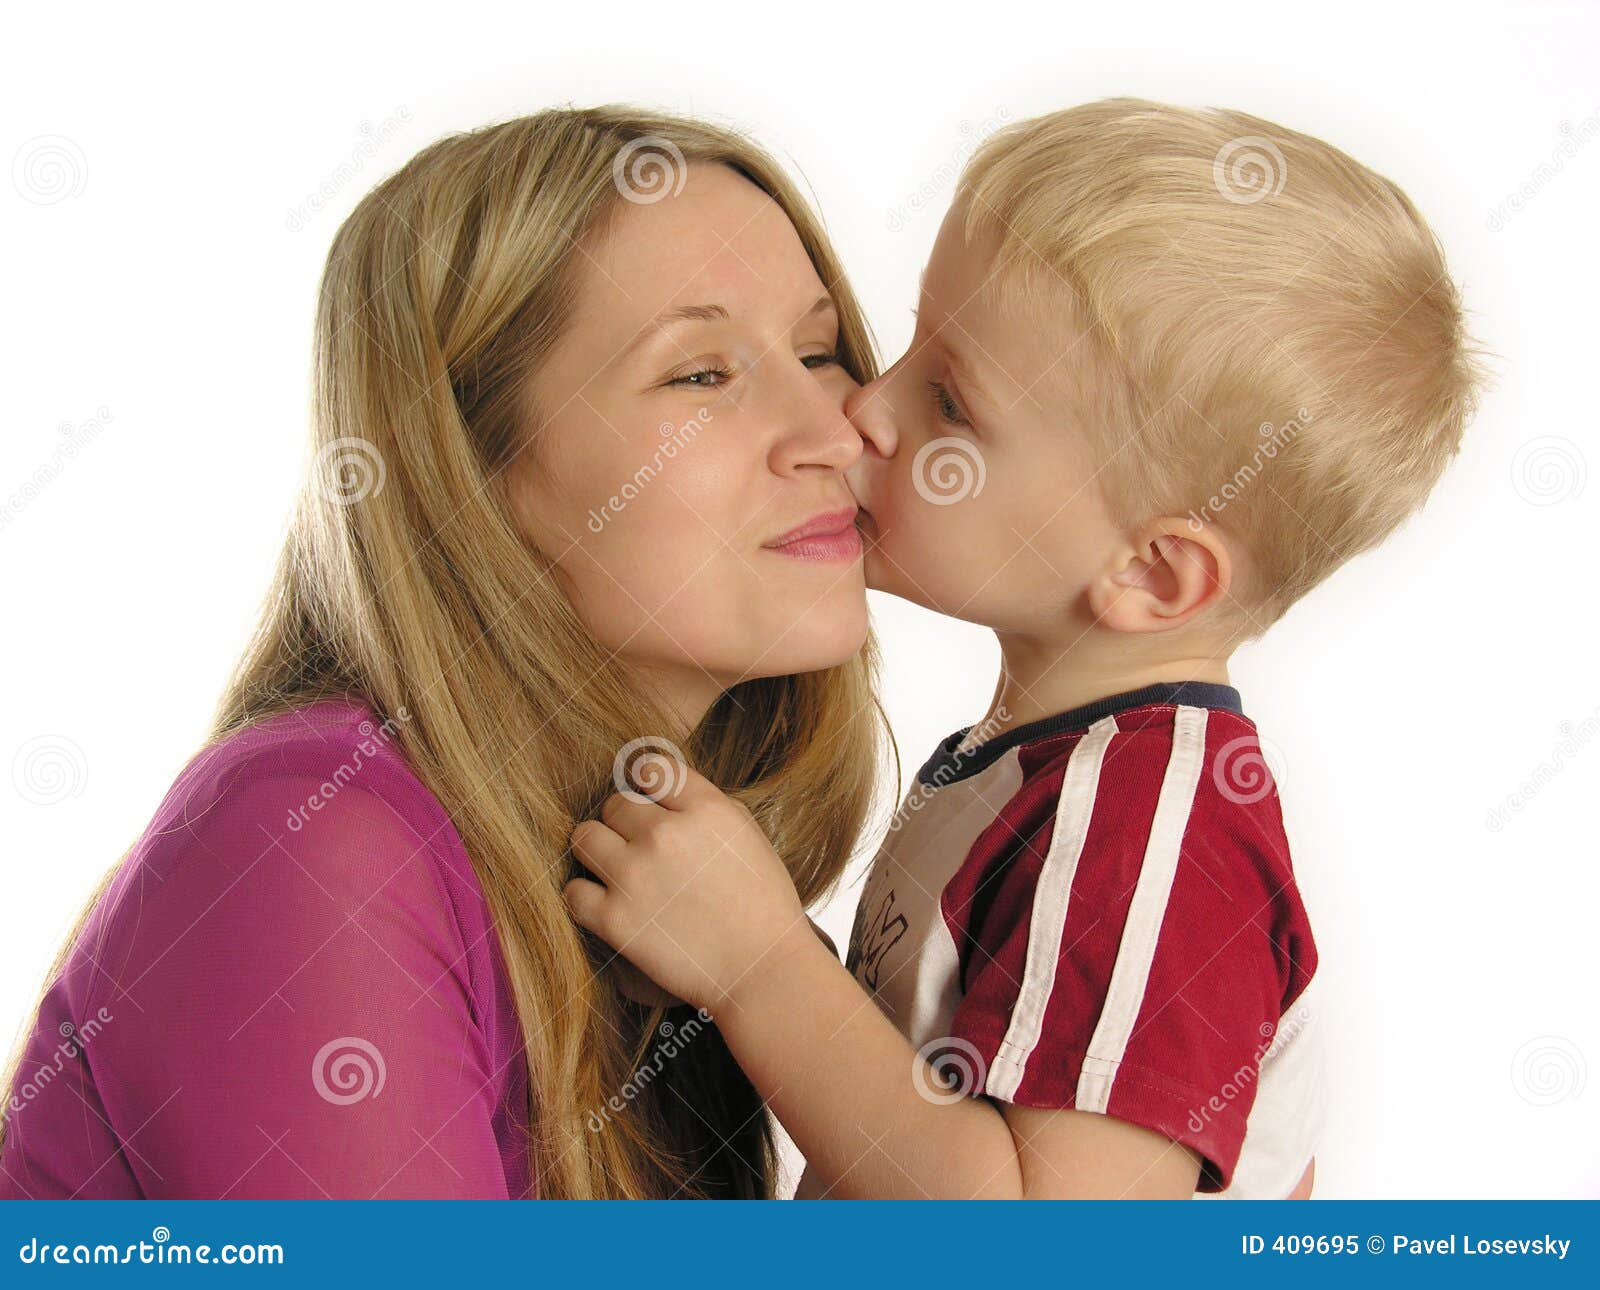 http://thumbs.dreamstime.com/z/child-kiss-mother-409695.jpg